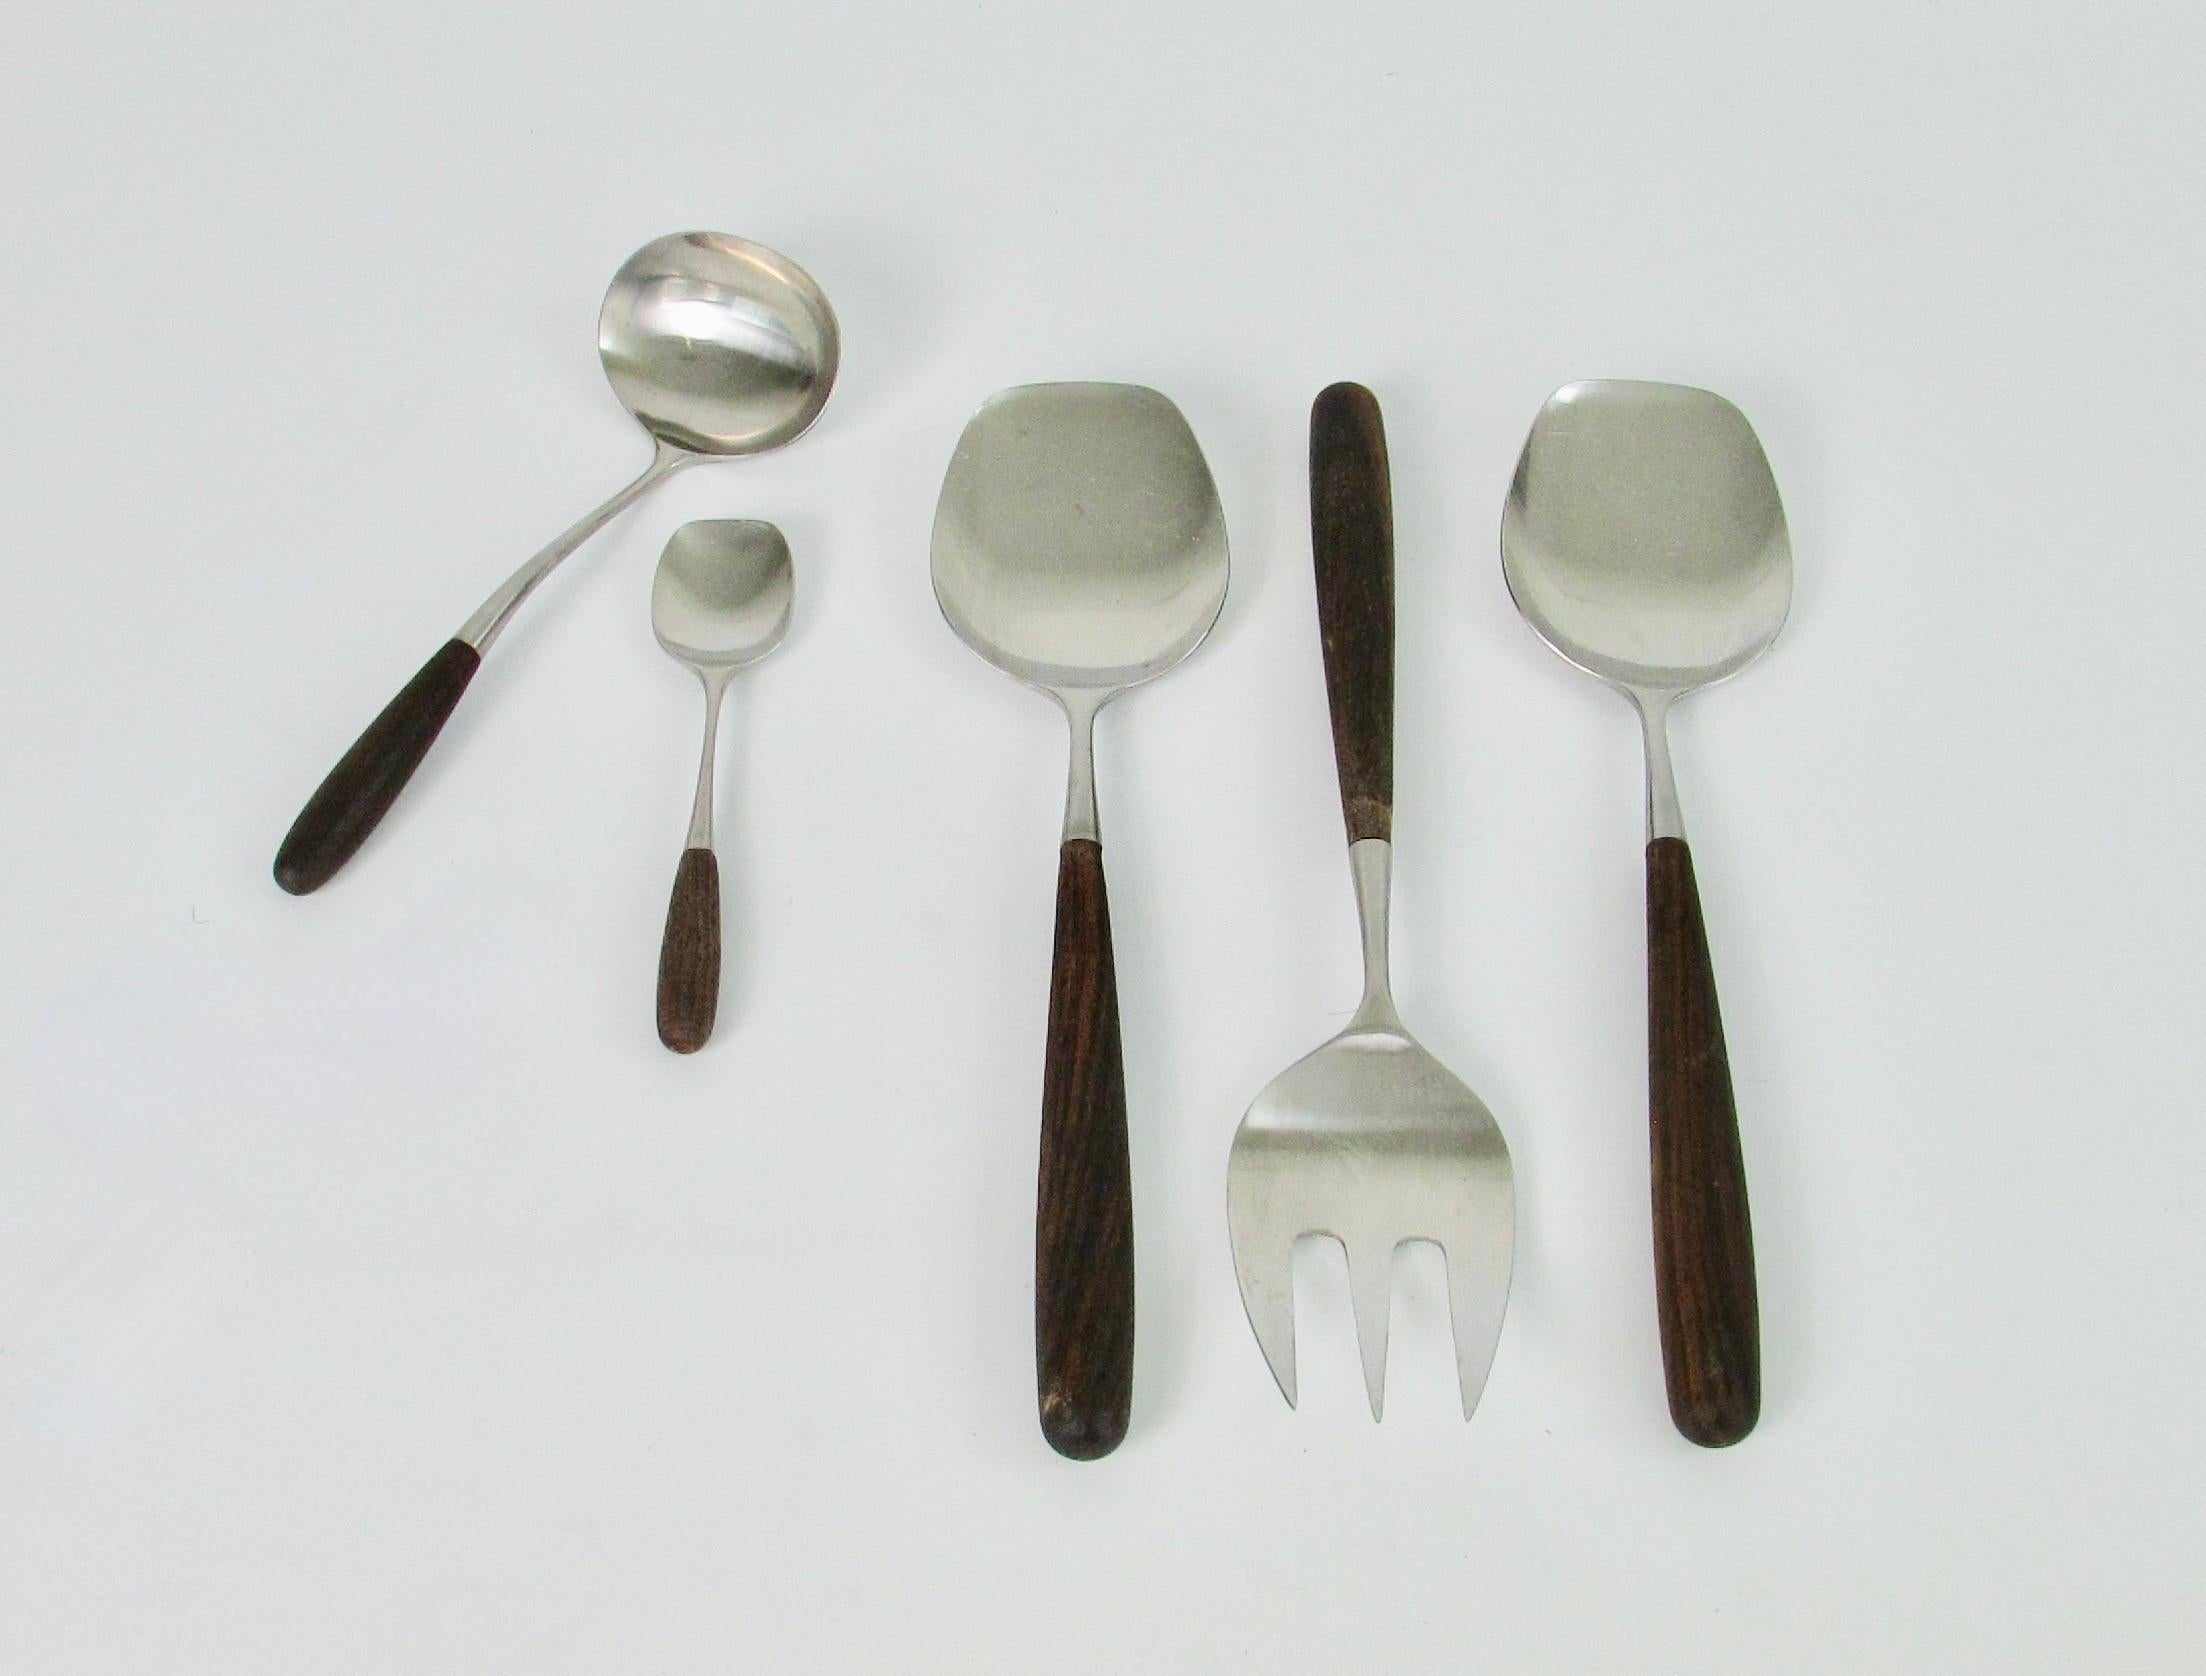 Fine large set of Lauffer Japan stainless steel flatware. Rosewood handles also in fine condition. Included are large spoon with large fork as salad servers, second large spoon, ladle. and sugar spoon. Soup spoon measures 7 3/8